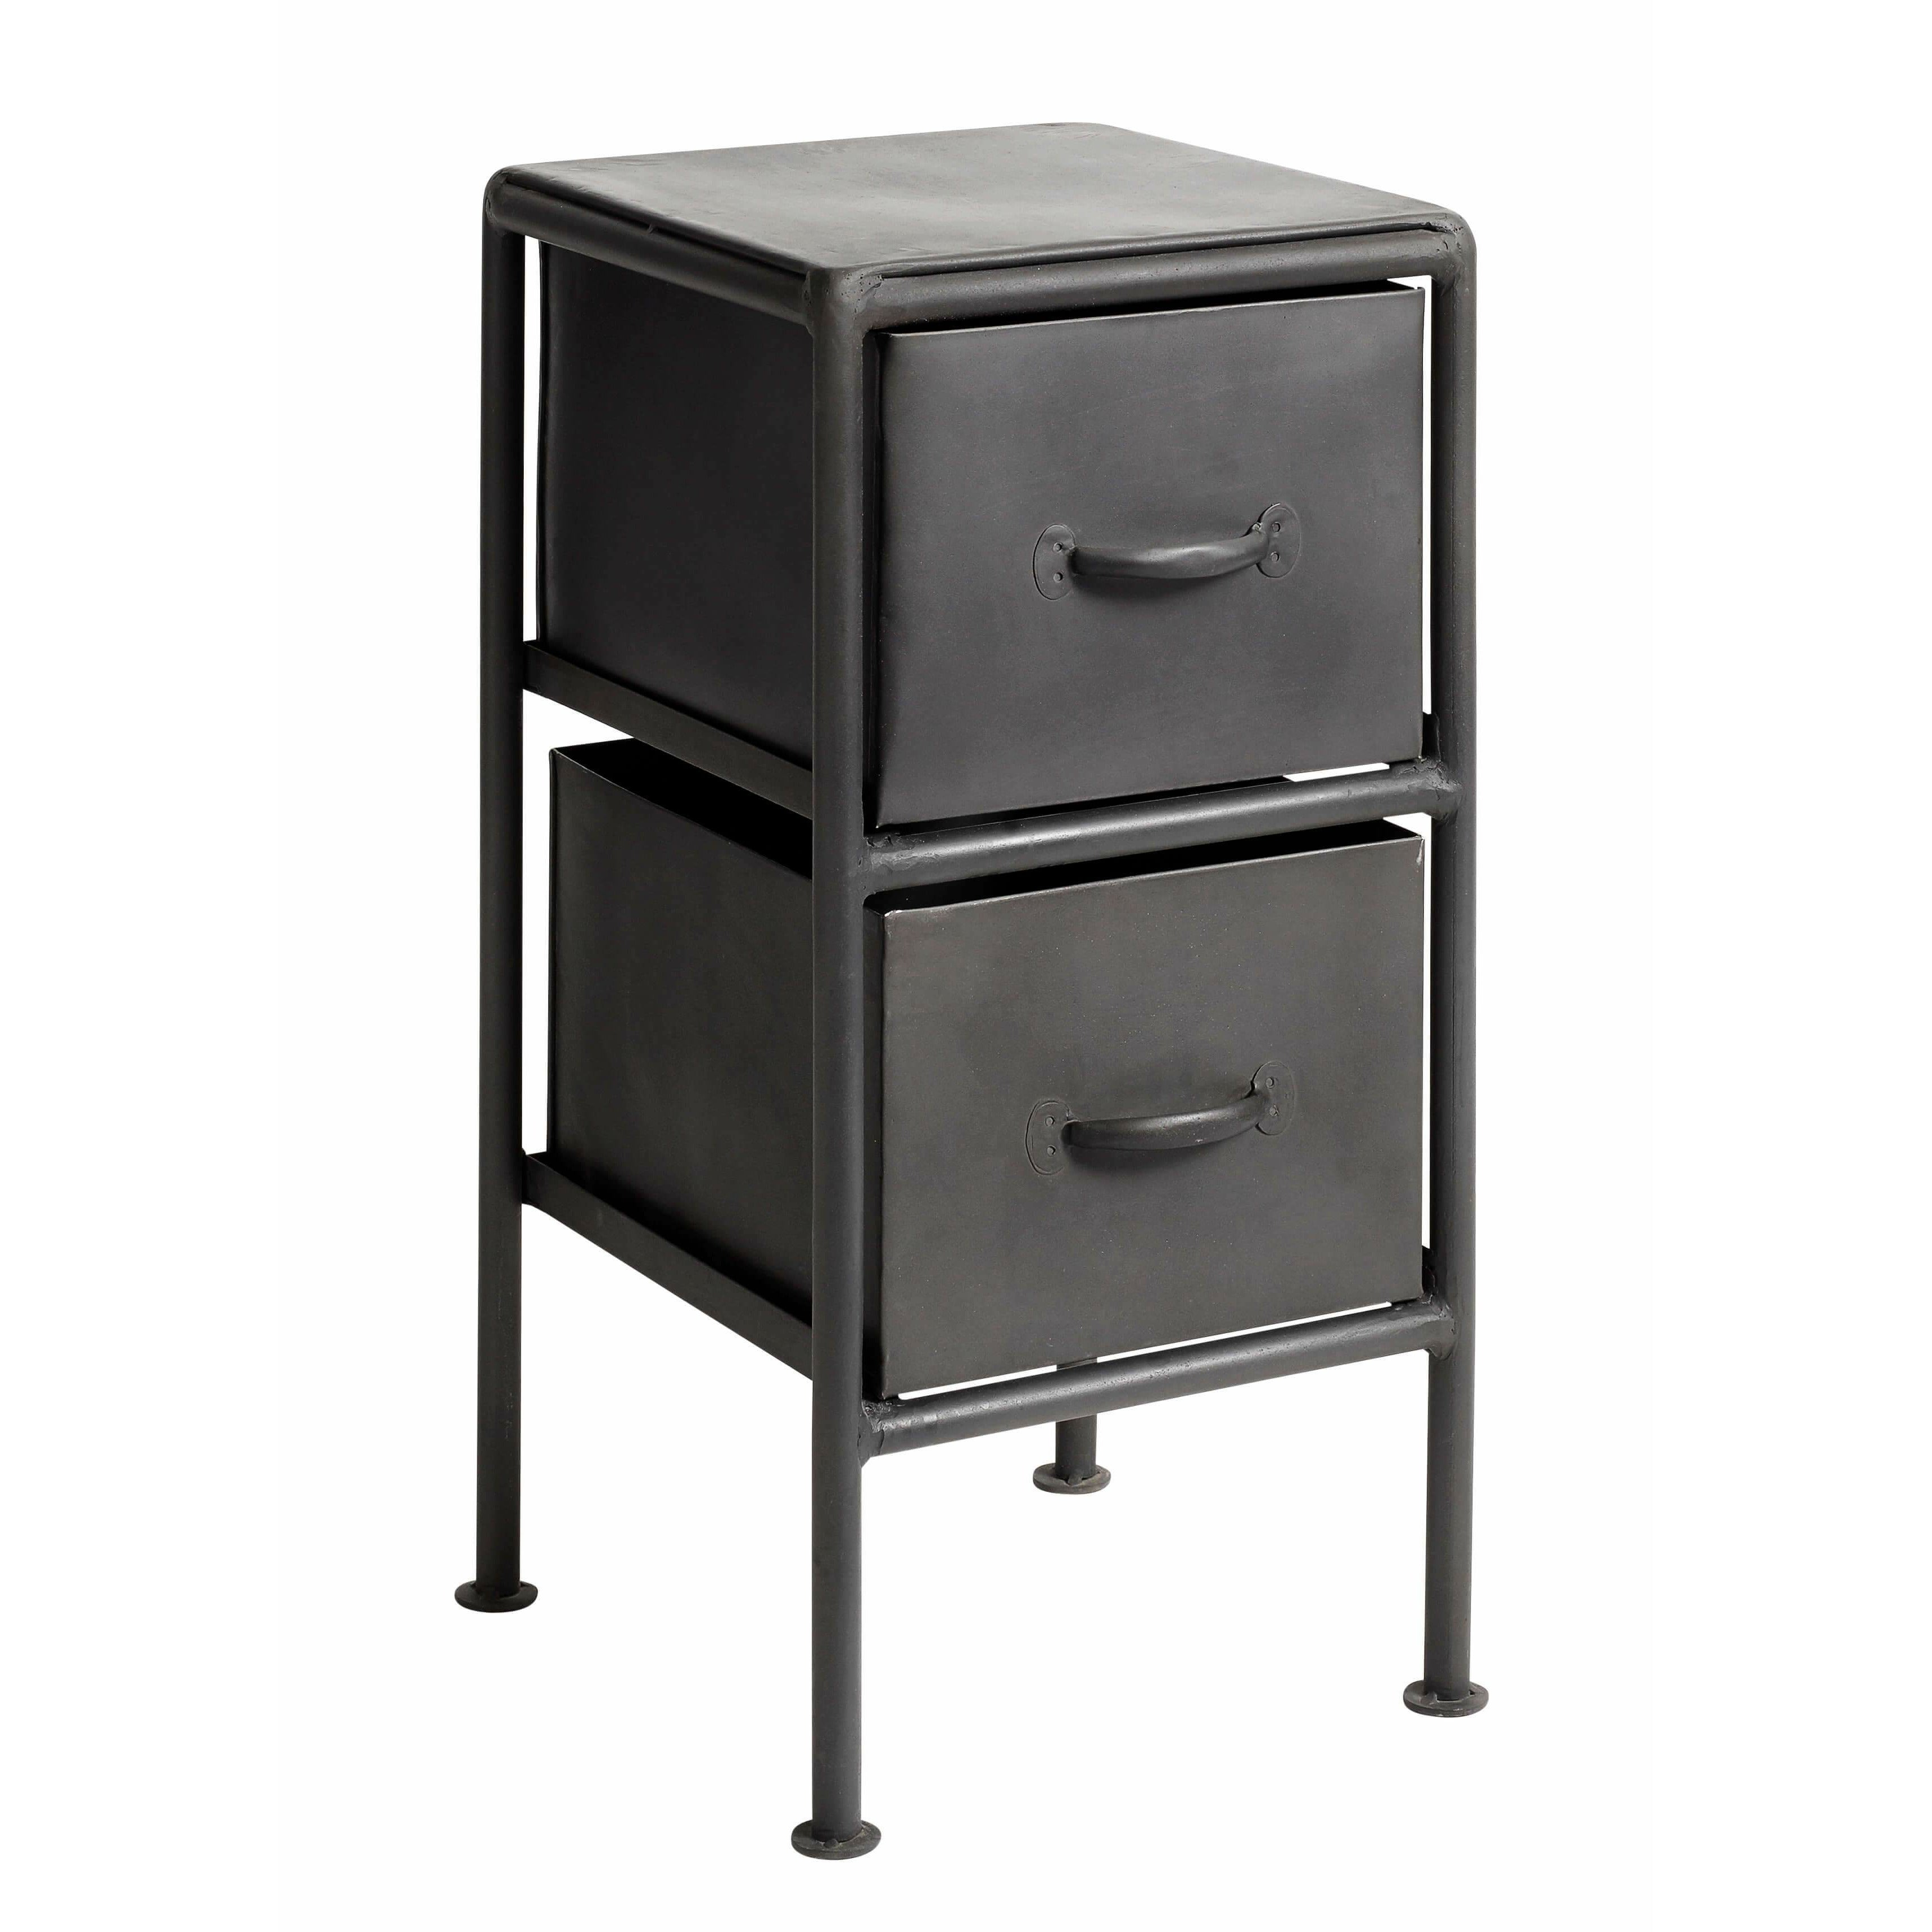 Muubs 05 Chest Of Drawers, Black